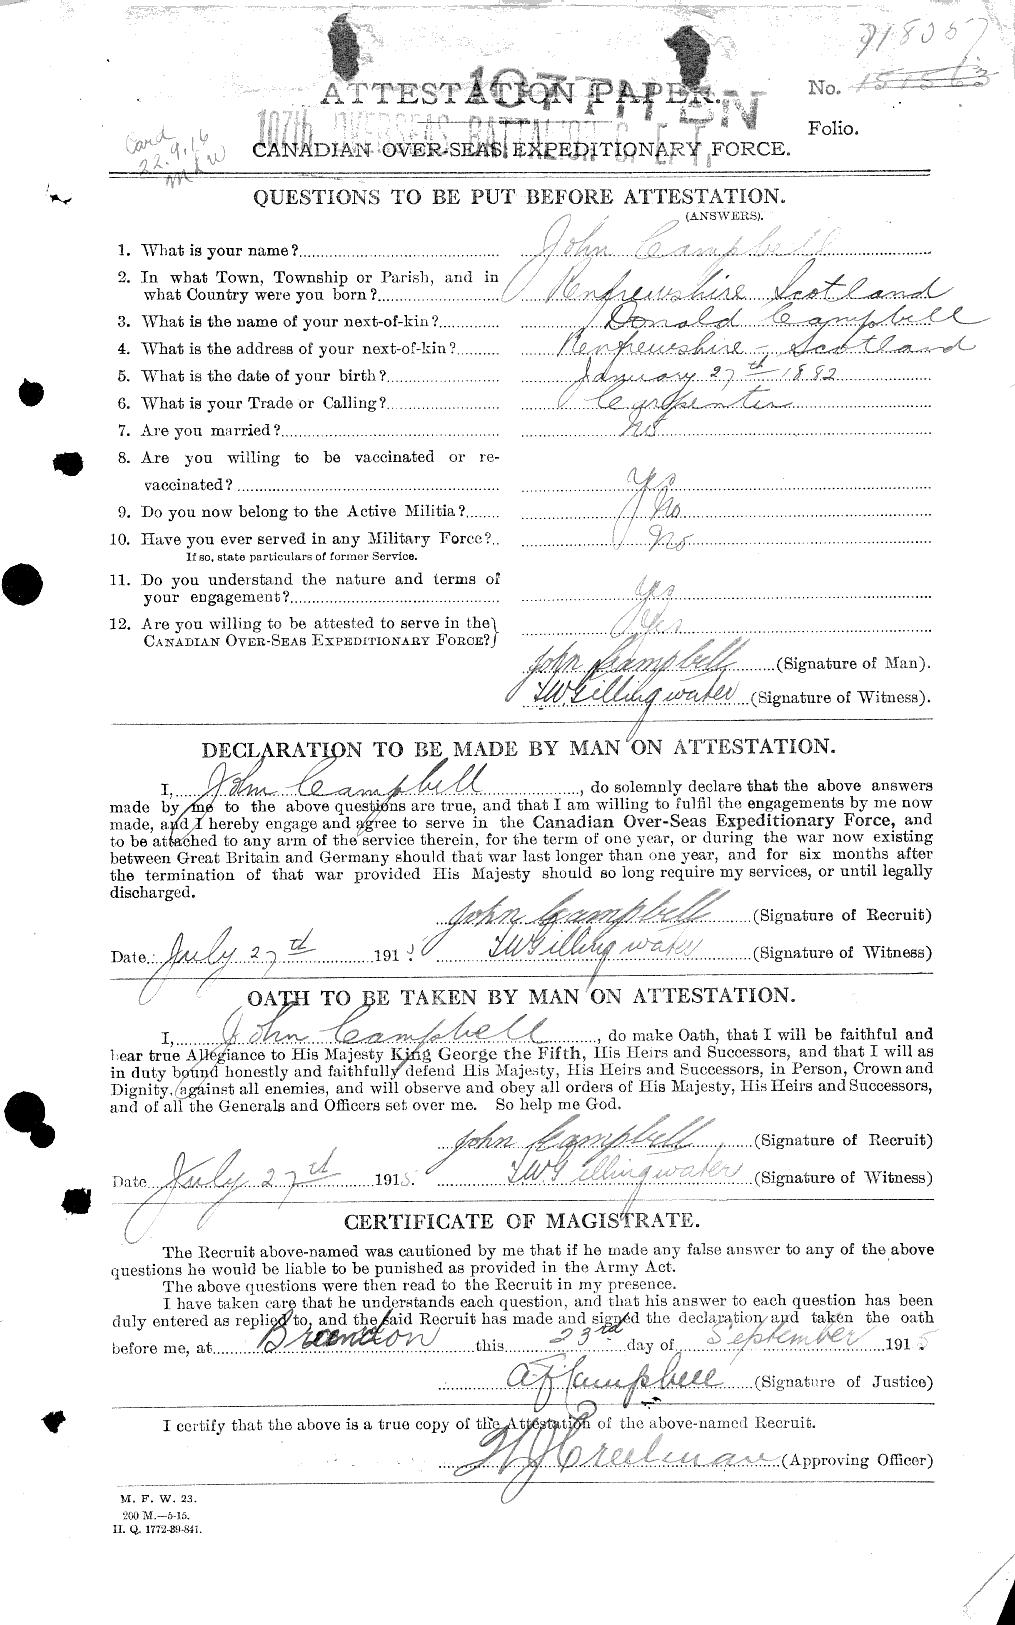 Personnel Records of the First World War - CEF 008452a